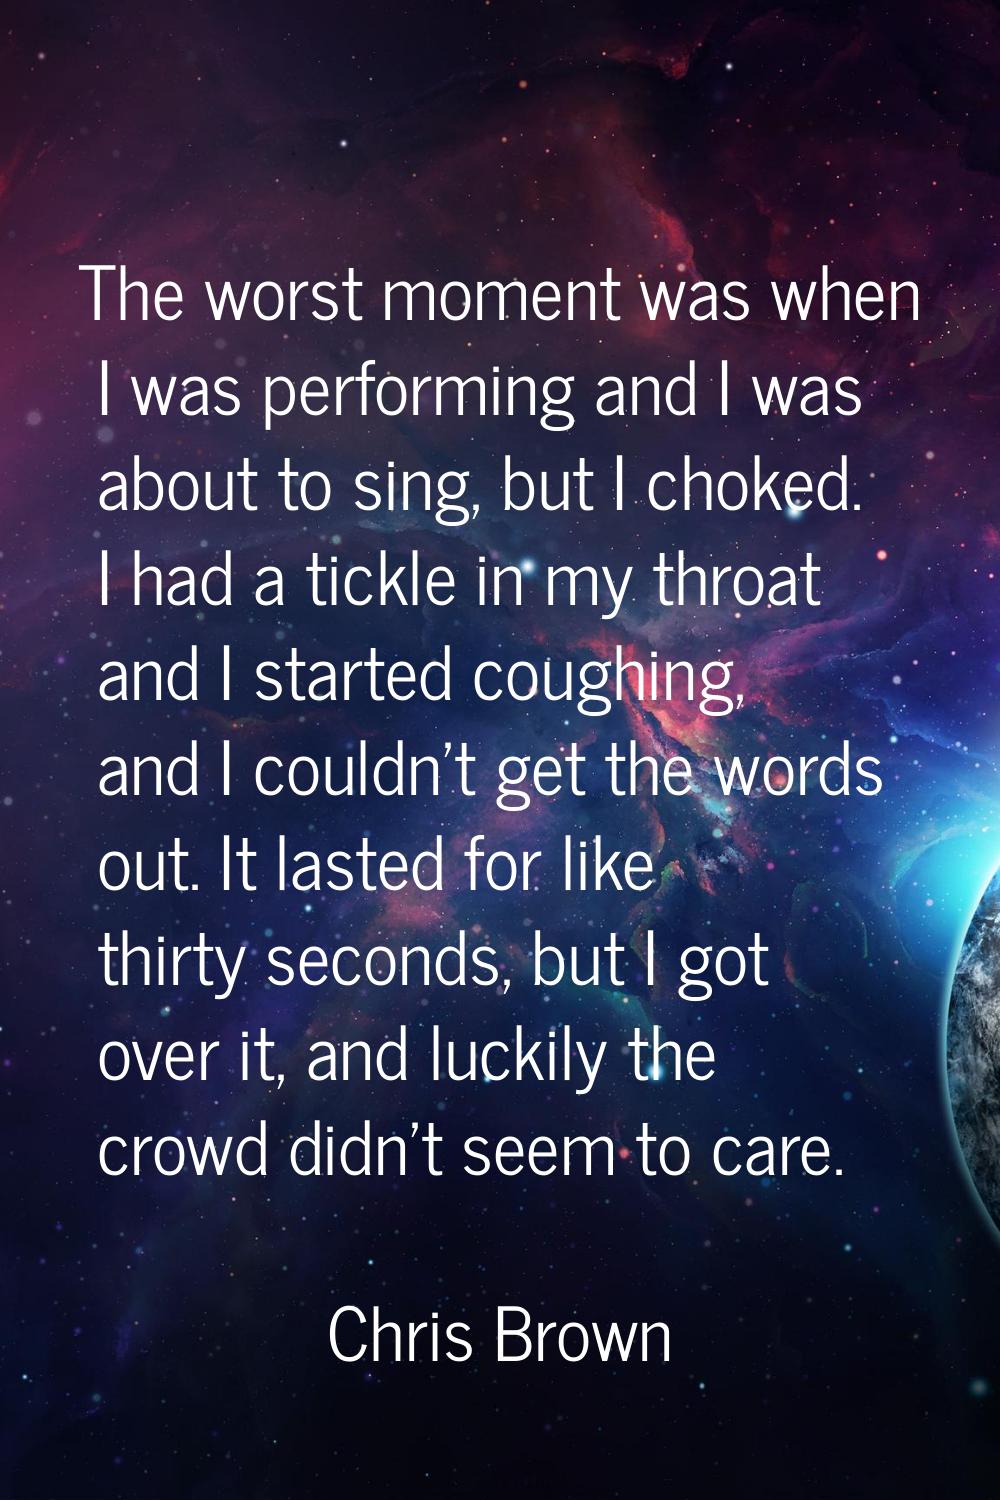 The worst moment was when I was performing and I was about to sing, but I choked. I had a tickle in